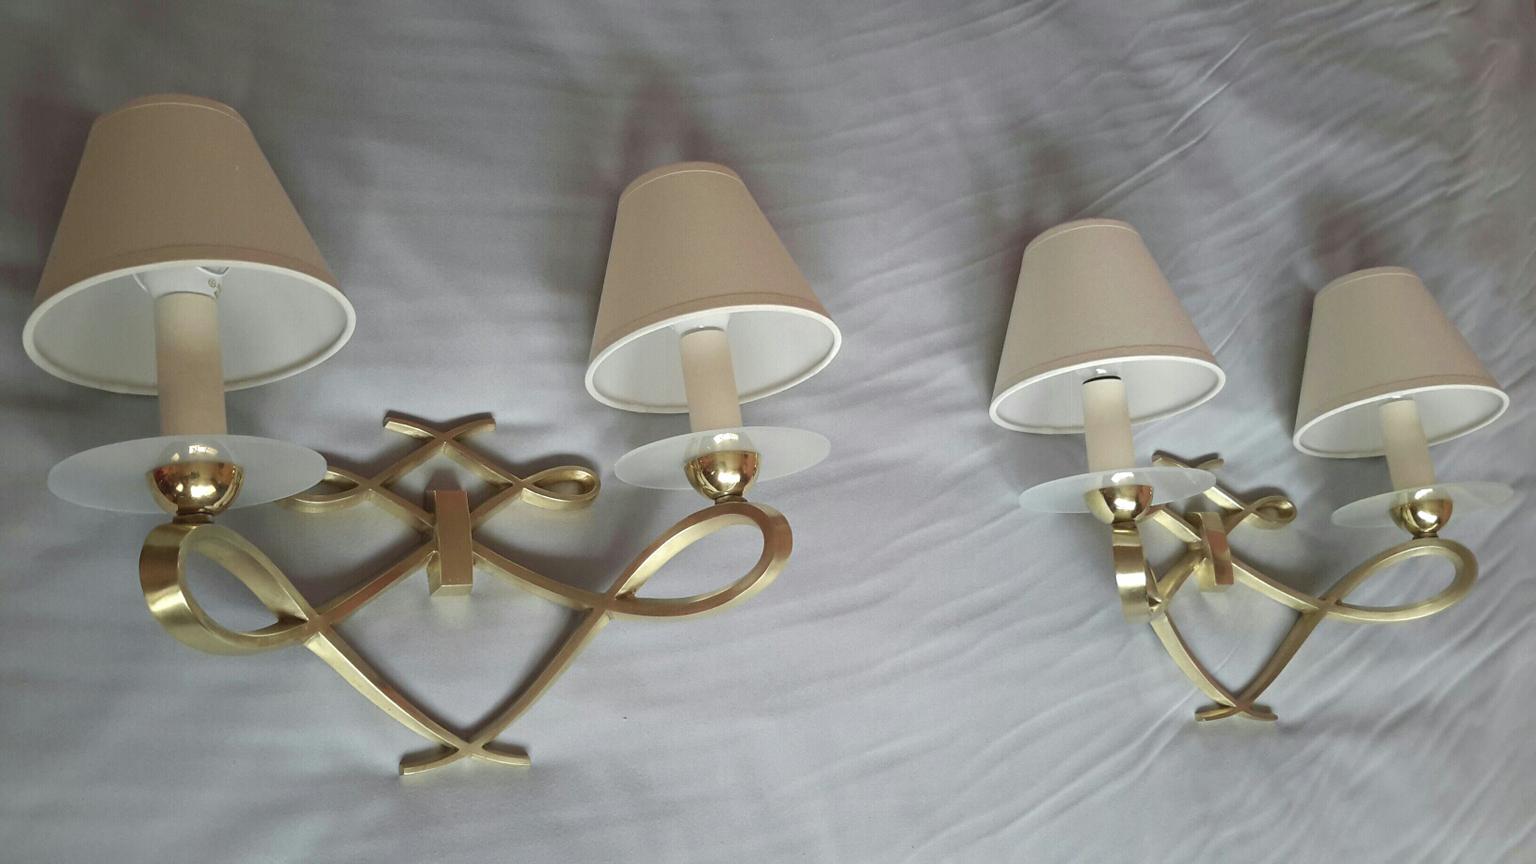 Very elegant pair of French neoclassical mid-1950s double sconces in polished gilted bronze nicely decorated with frosted glass discs ornements.
By Arlus in the style of Jules Leleu.
The pair is in a very good original condition, the electric part